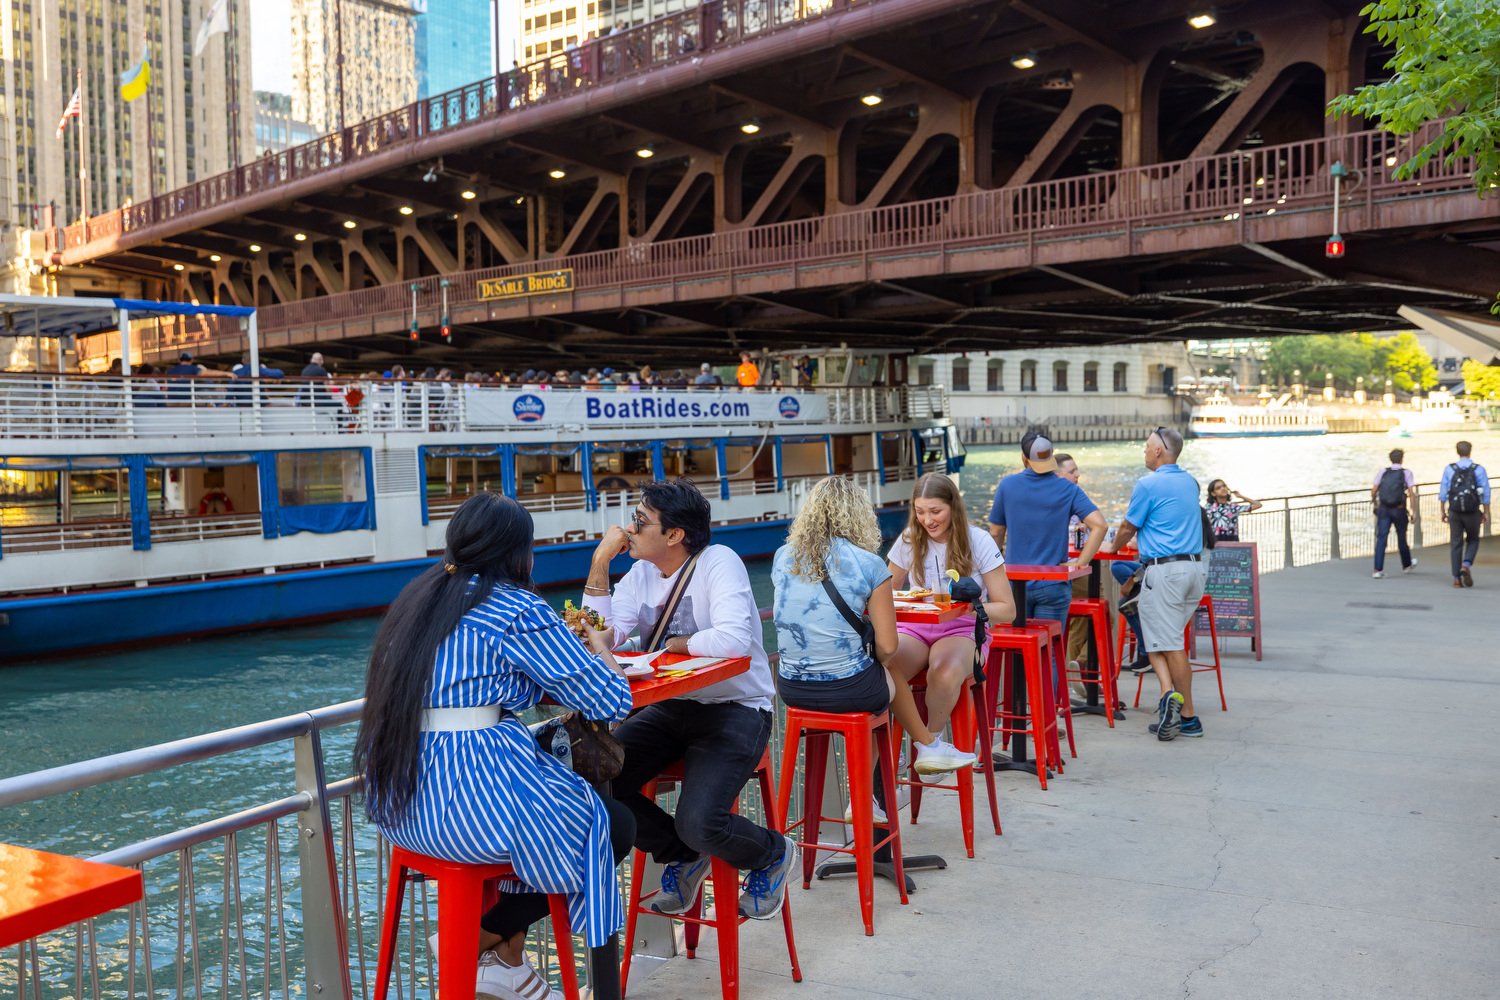 Diners on the Chicago Riverwalk